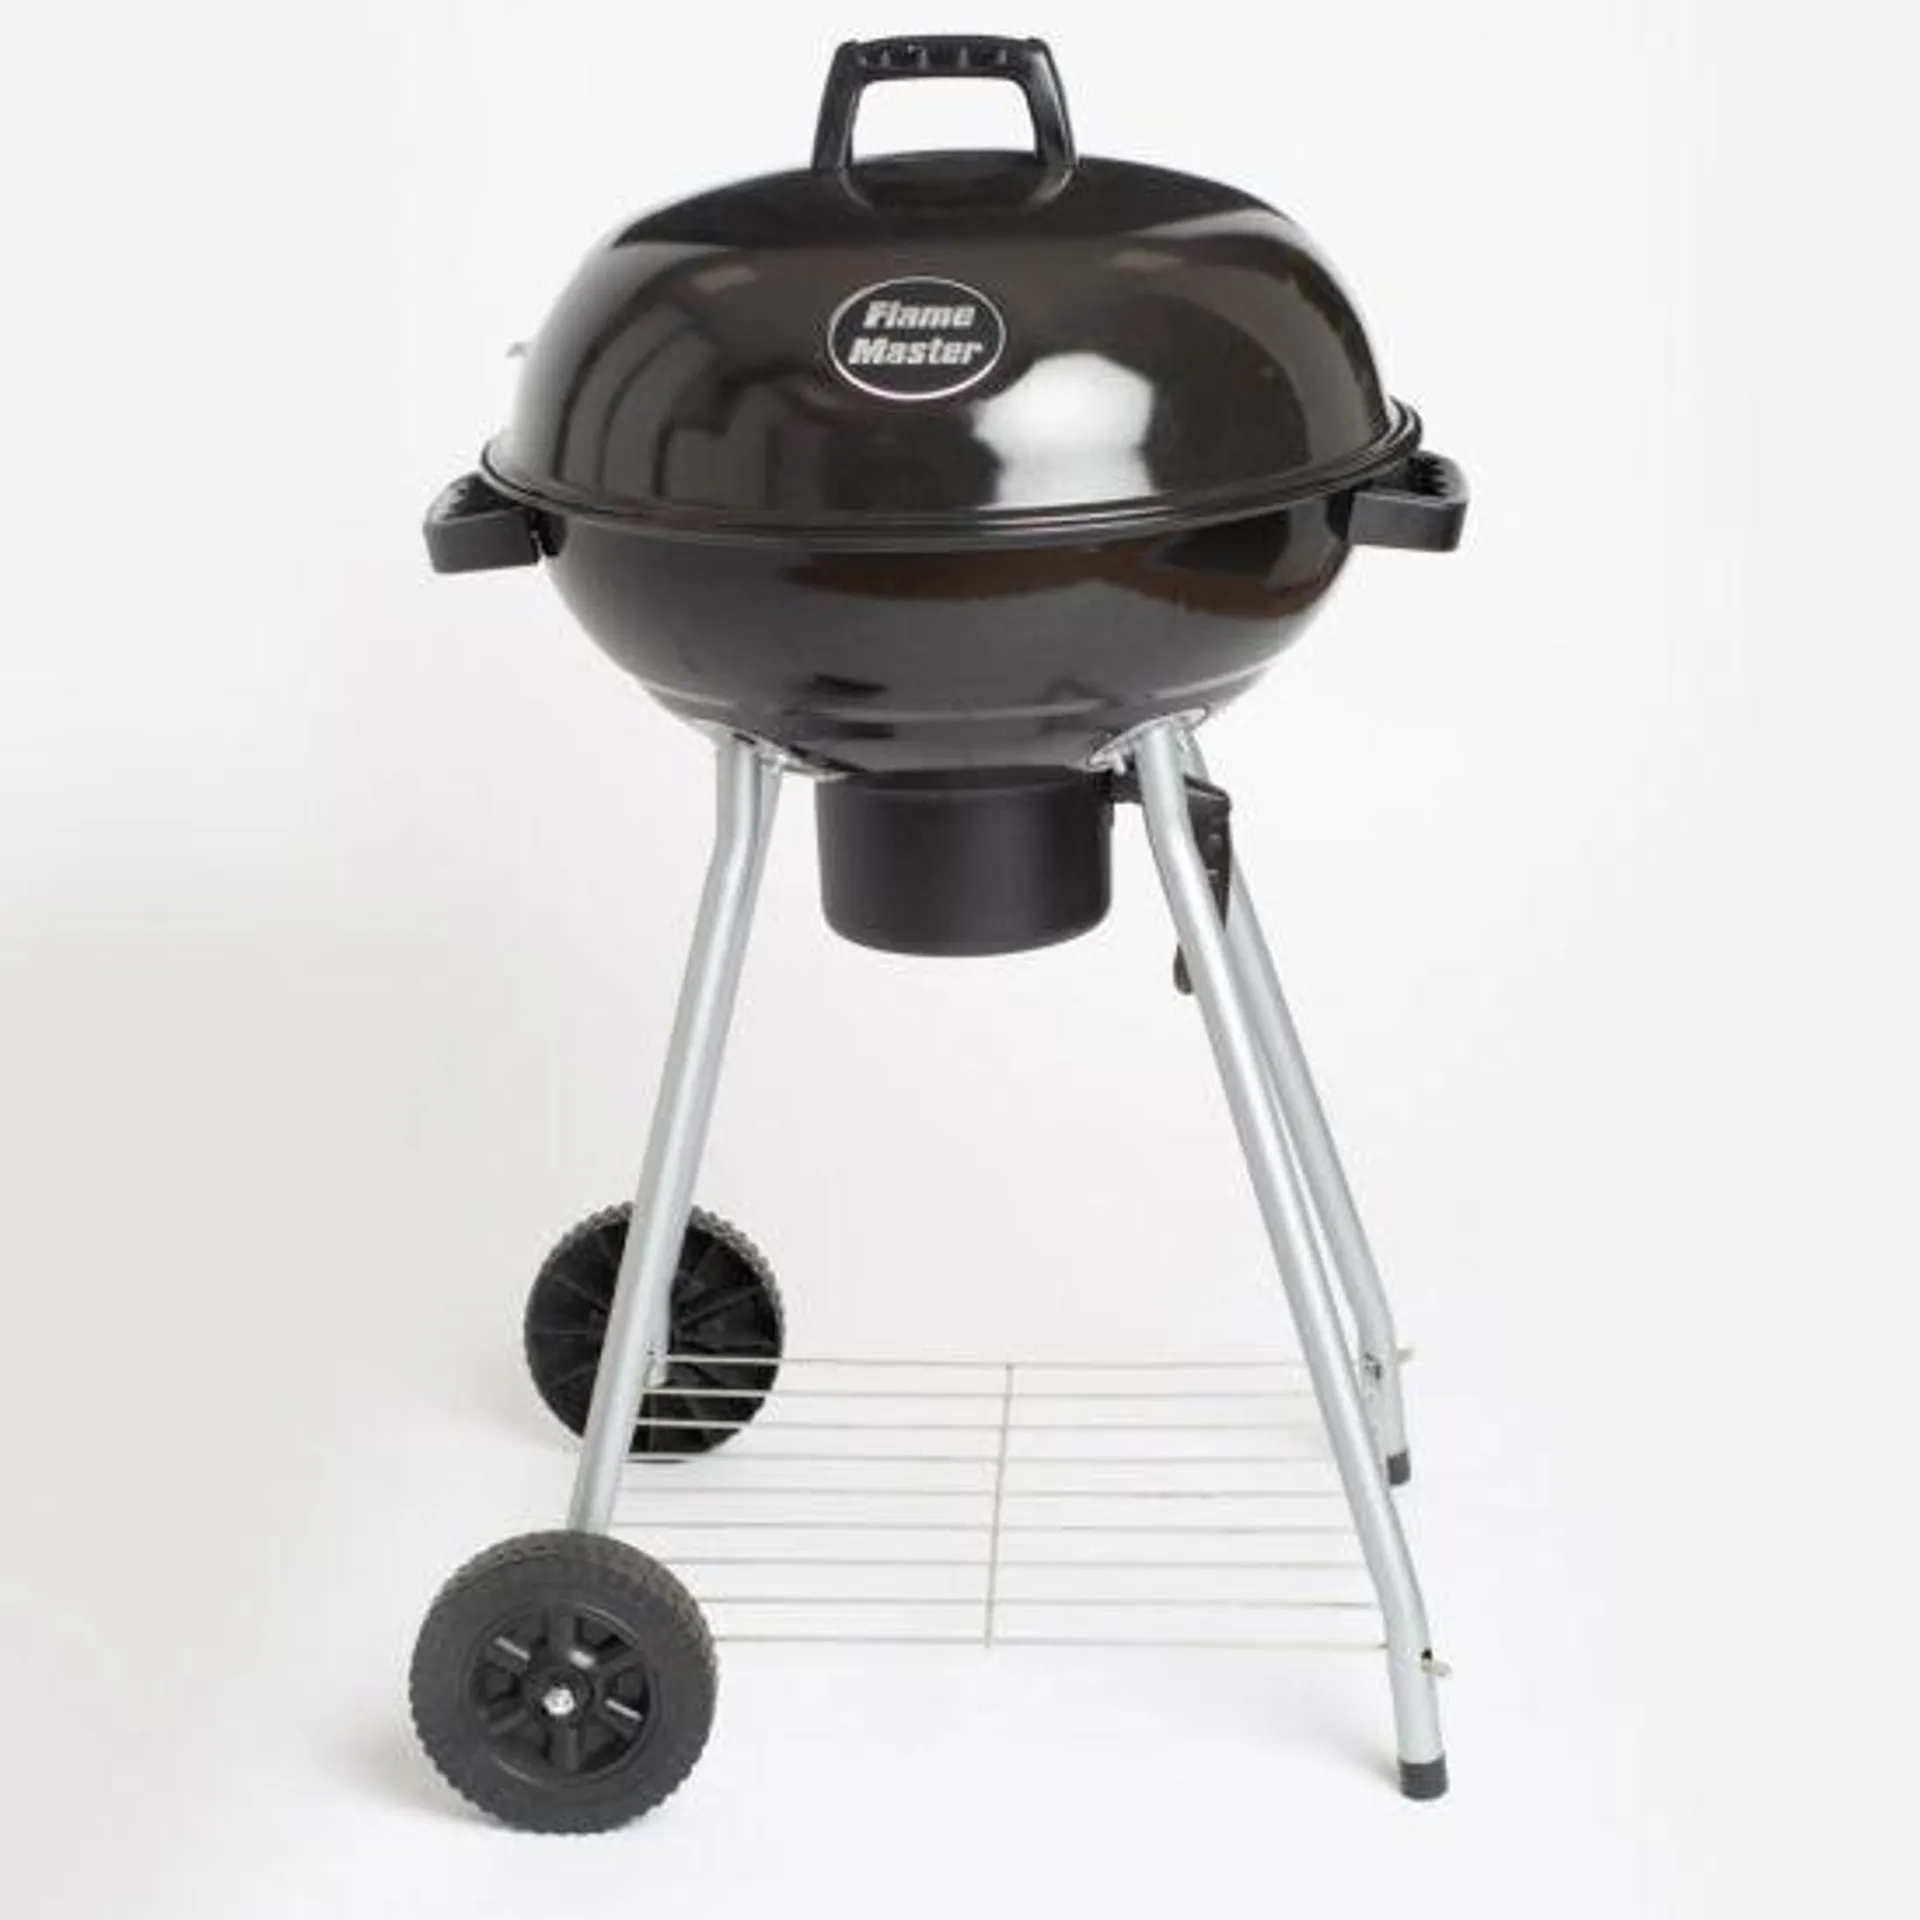 Flamemaster 18 Inch Kettle Grill With Ash Tray